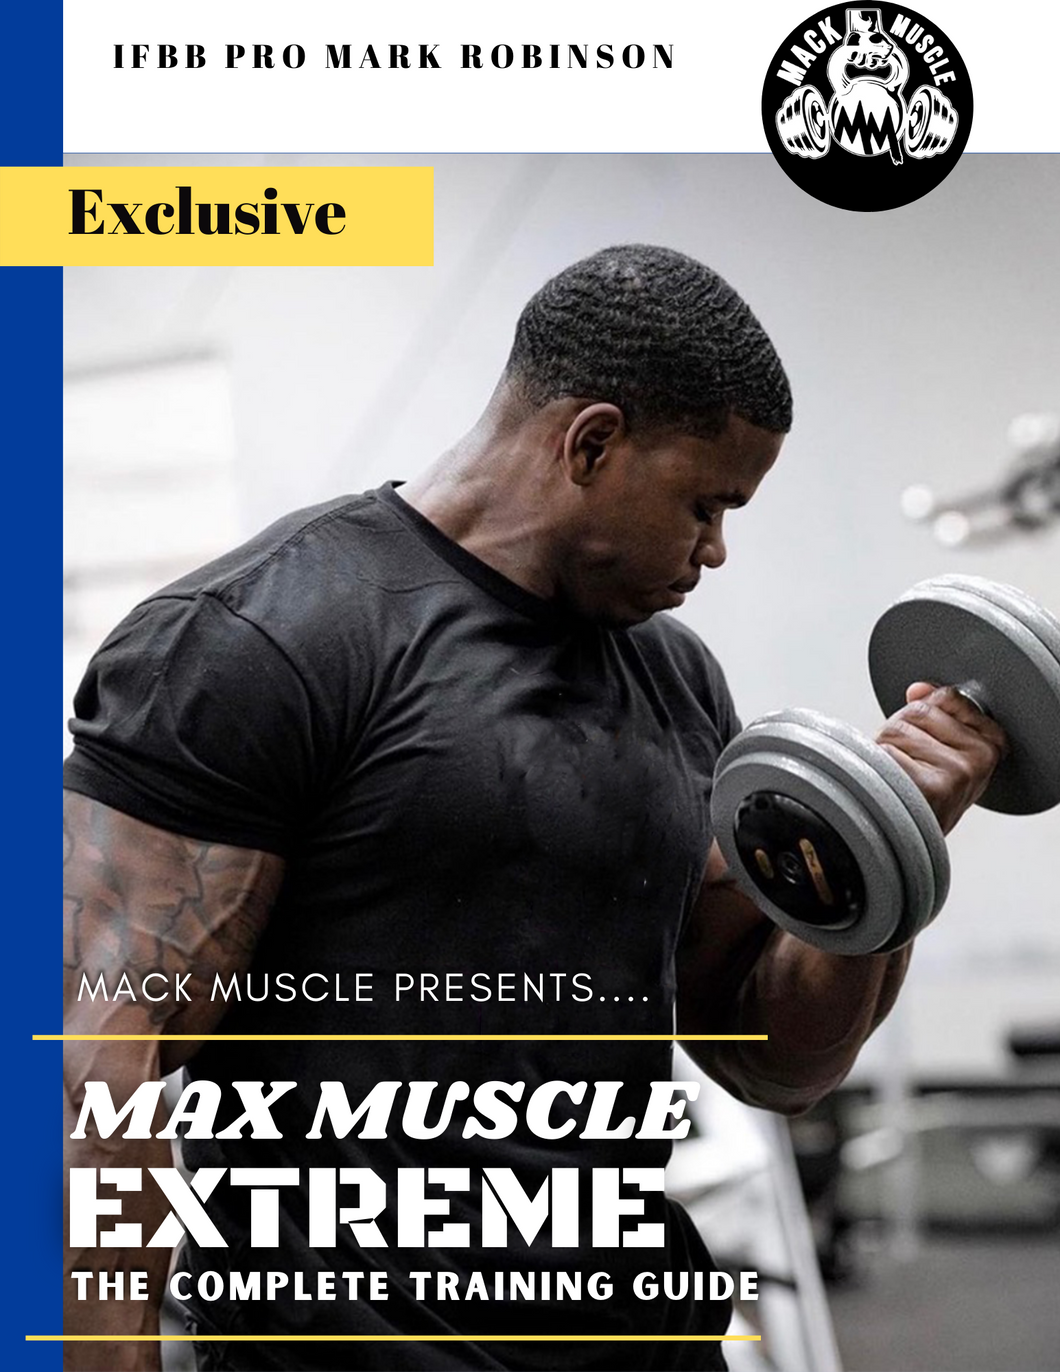 Max Muscle Extreme - The Complete Training Guide